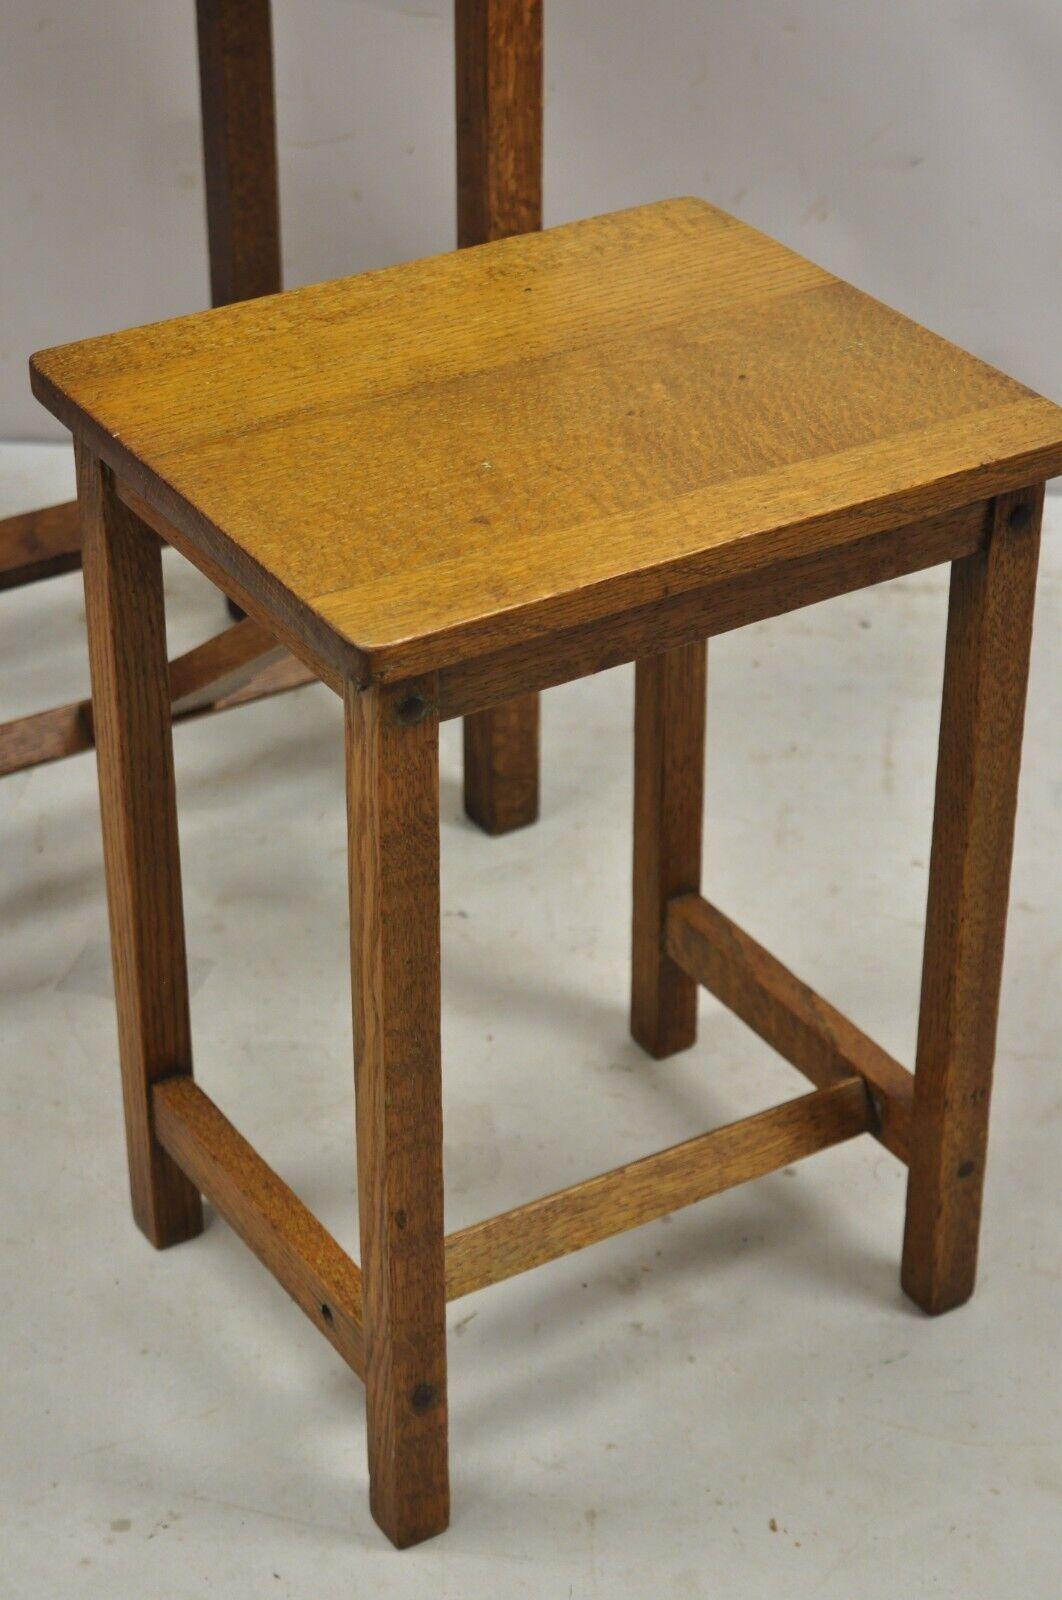 Early 20th Century Antique H.T. Cushman Betumal Oak Telephone Stand Small Child's Desk For Sale